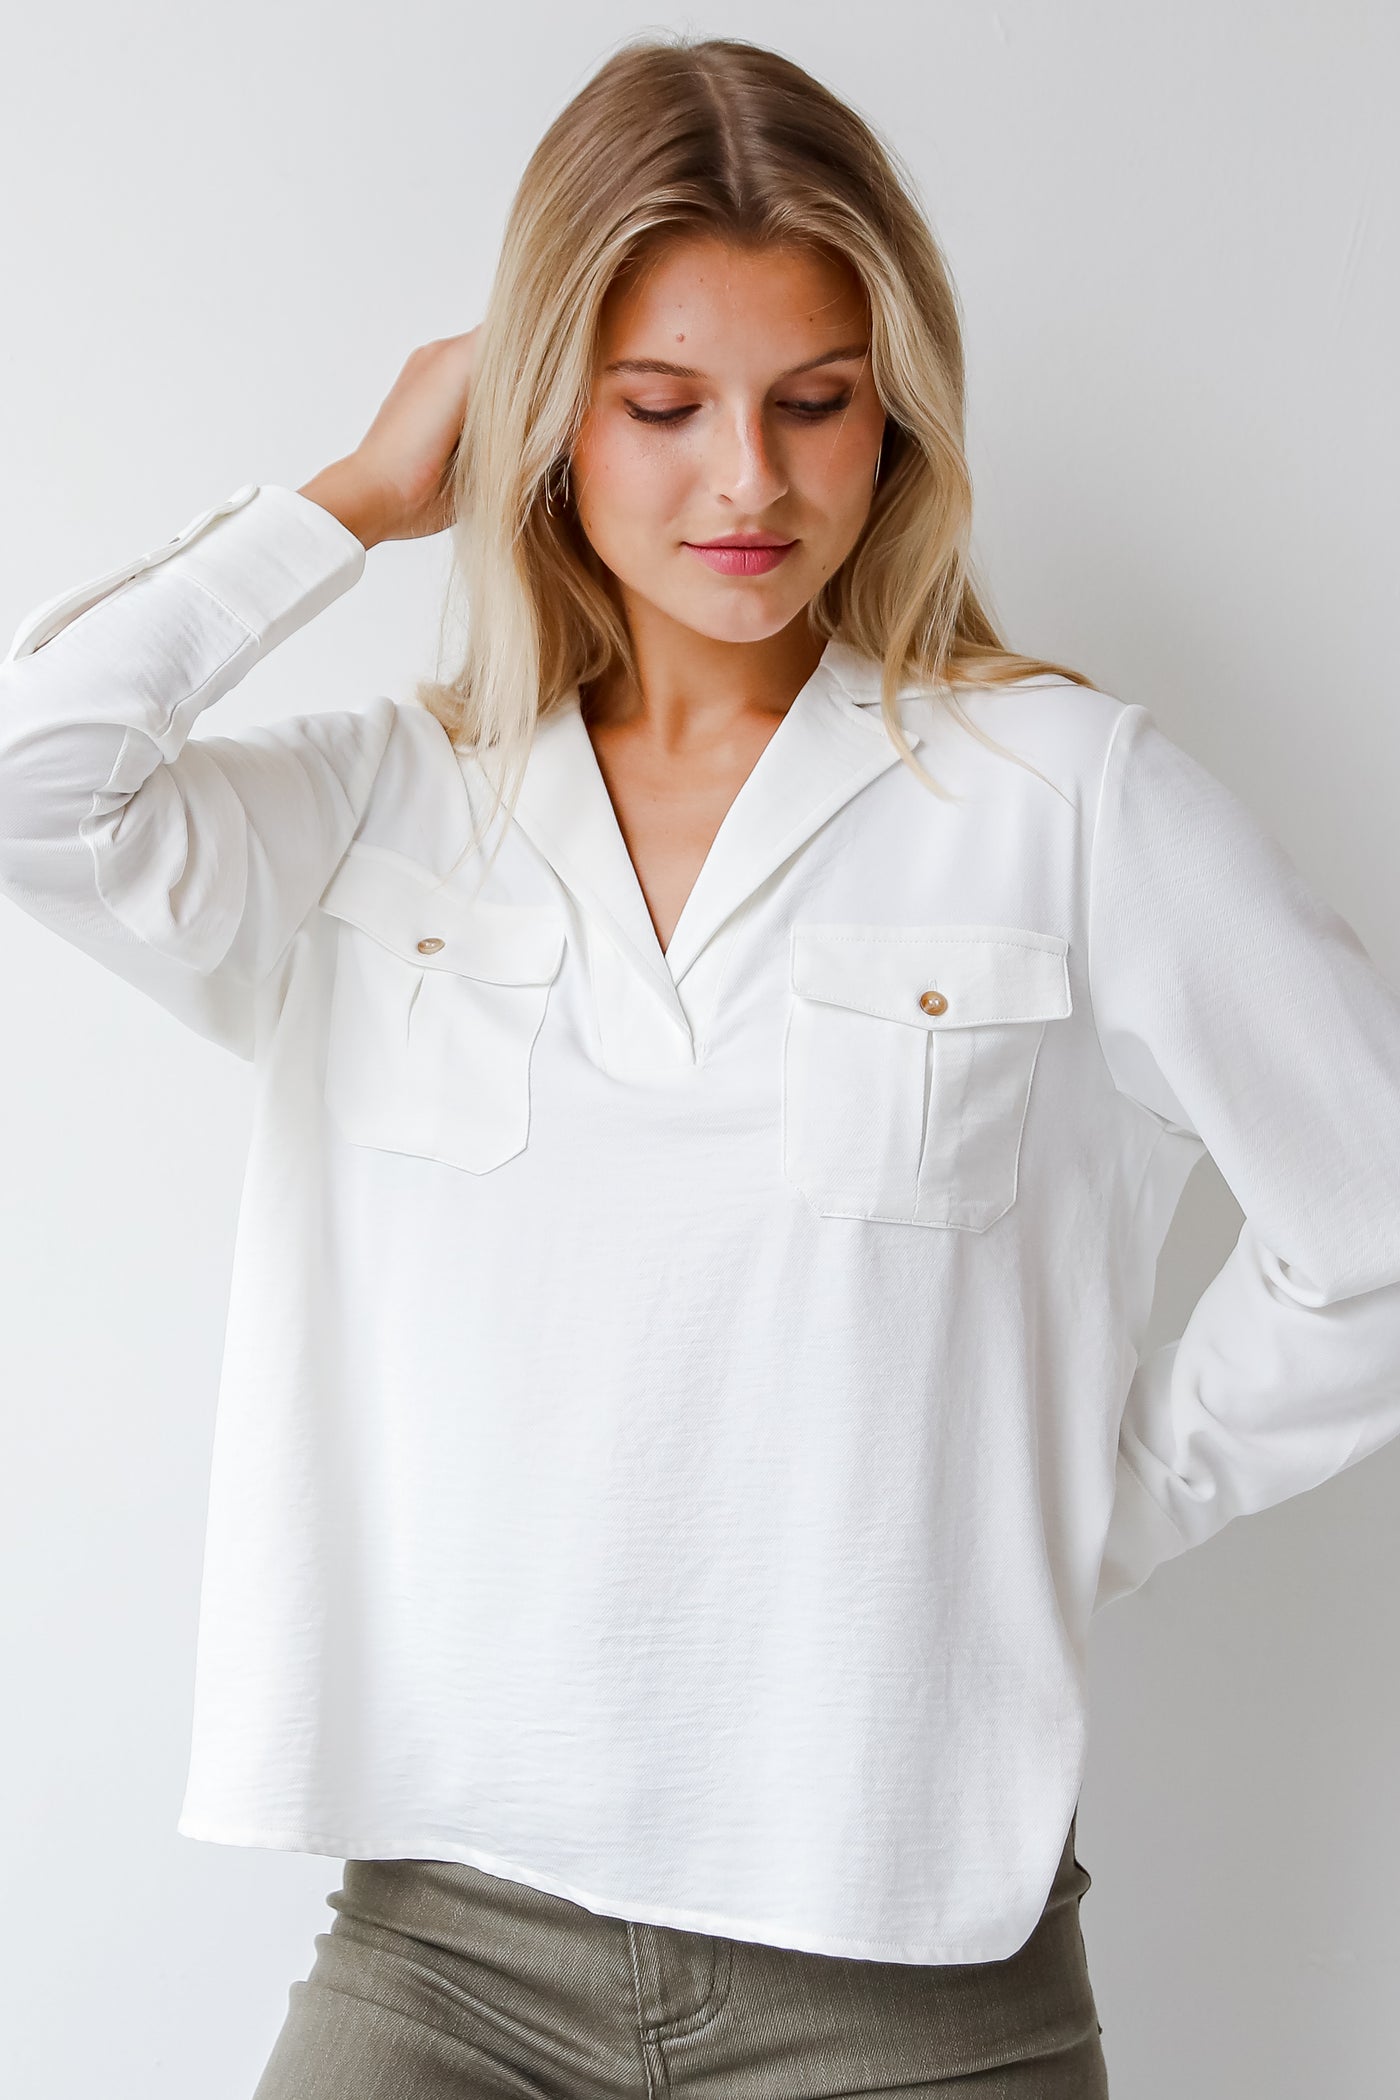 white collared blouse front view